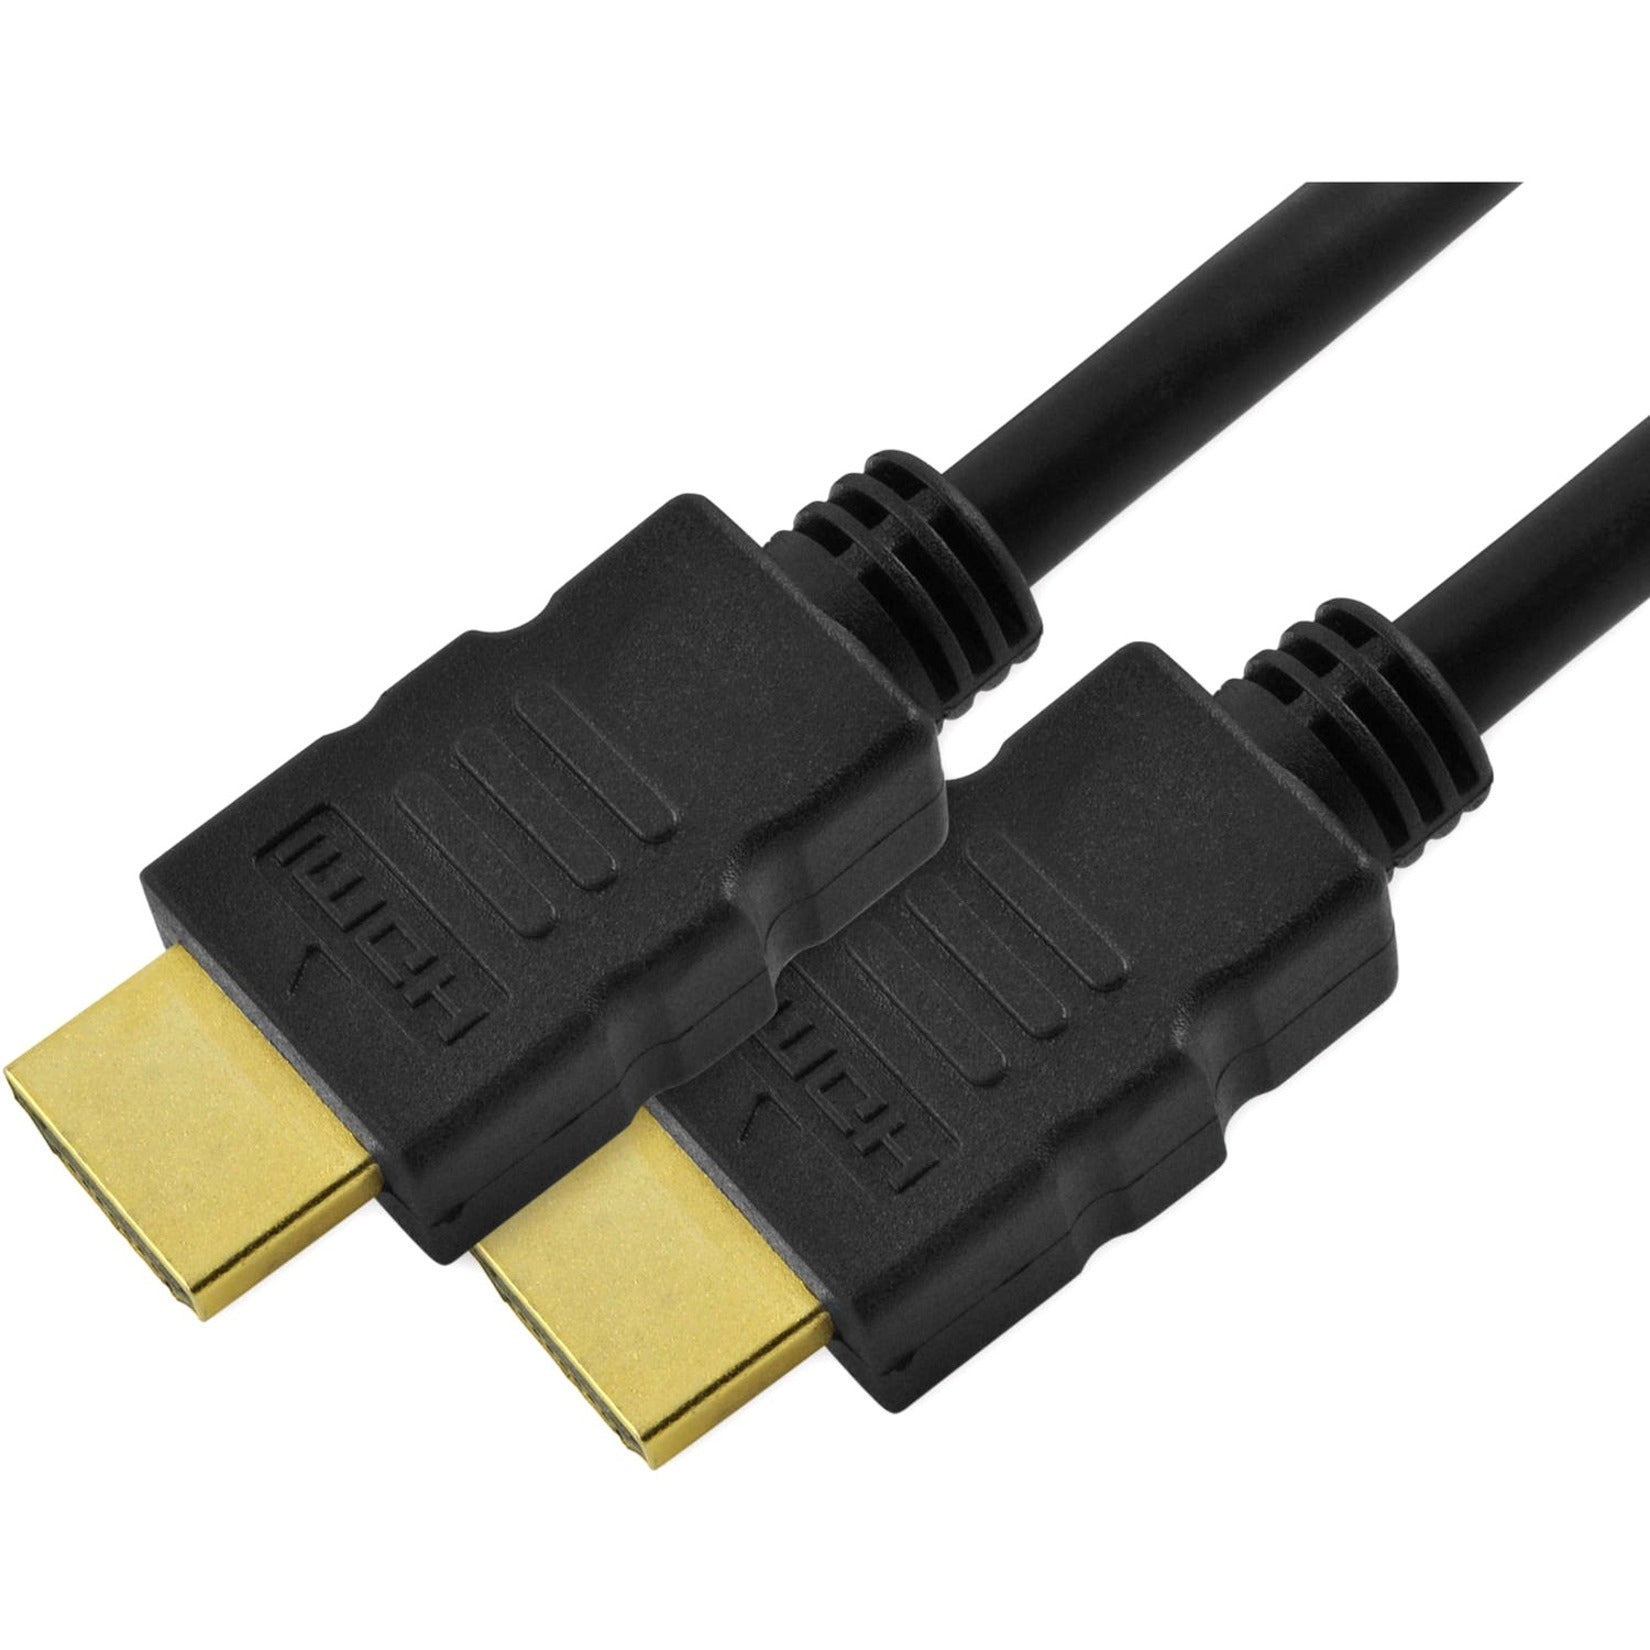 4XEM 4XHDMI4K2KPRO3 3ft 1m Ultra High Speed 4K2K HDMI Cable, Gold-plated Connectors, 18 Gbit/s Data Transfer Rate